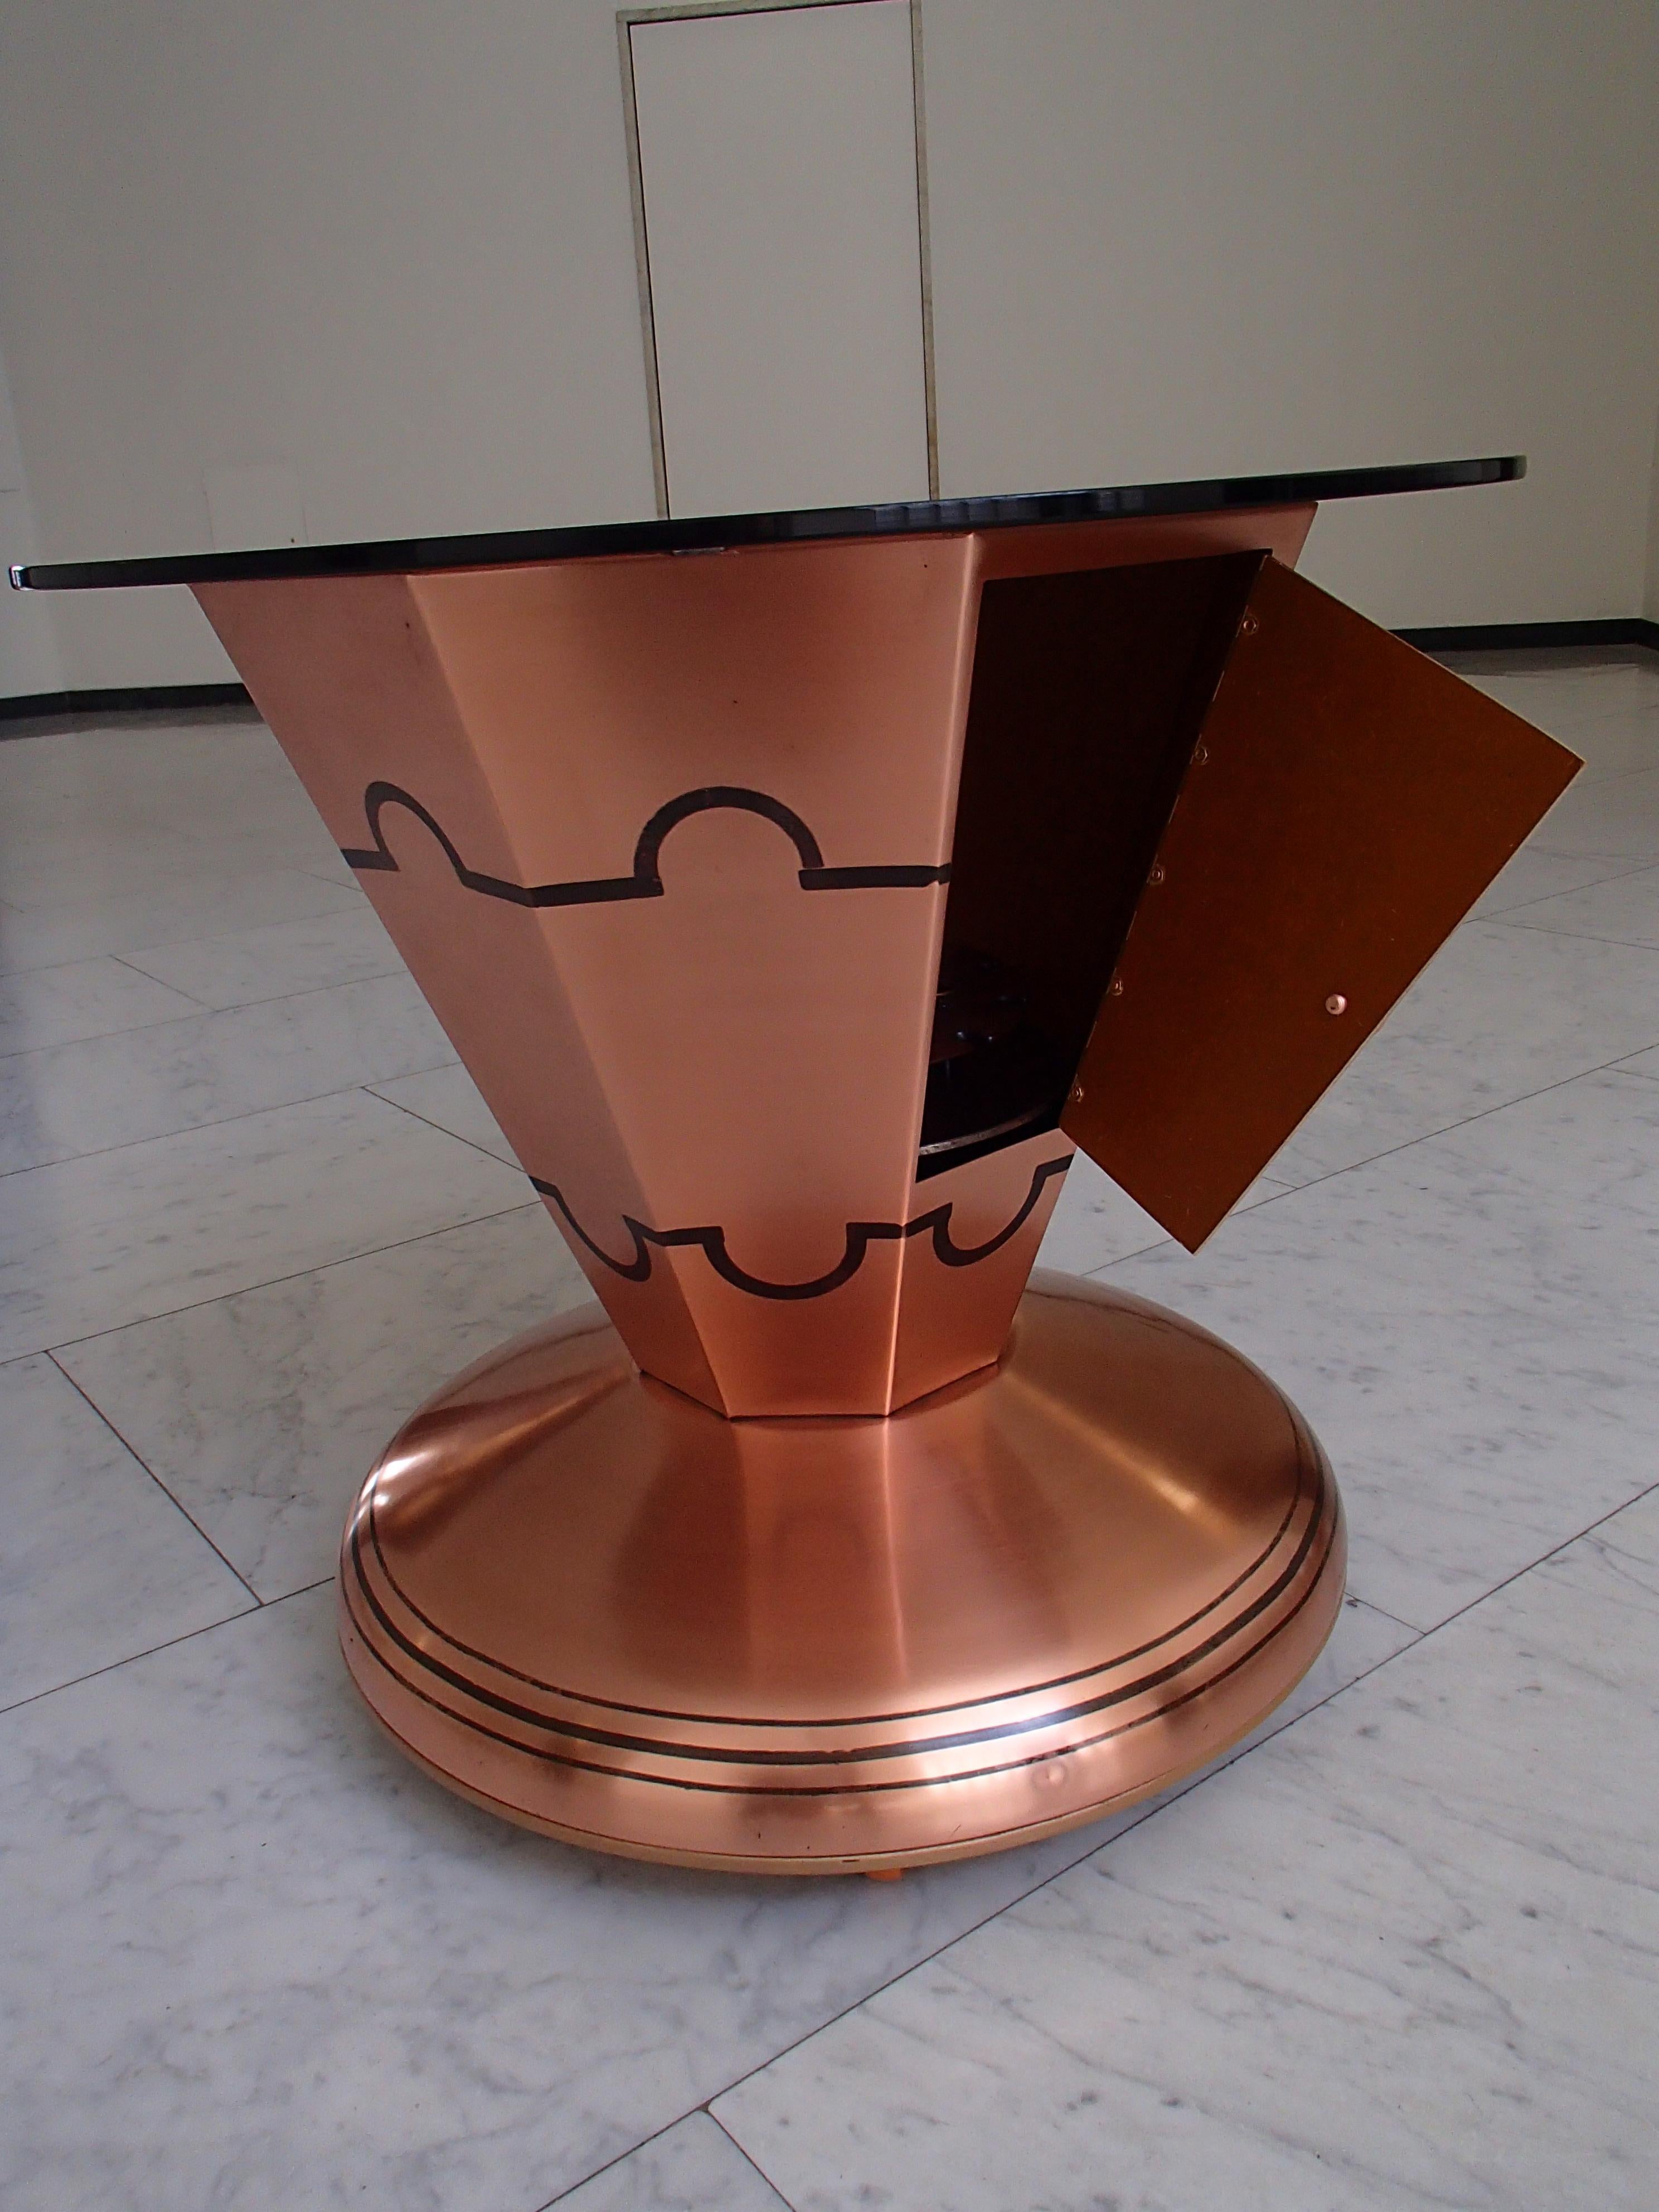 Art Deco Copper Bar Table on Wheels with Turnable Tray Inside and Glass Top For Sale 1